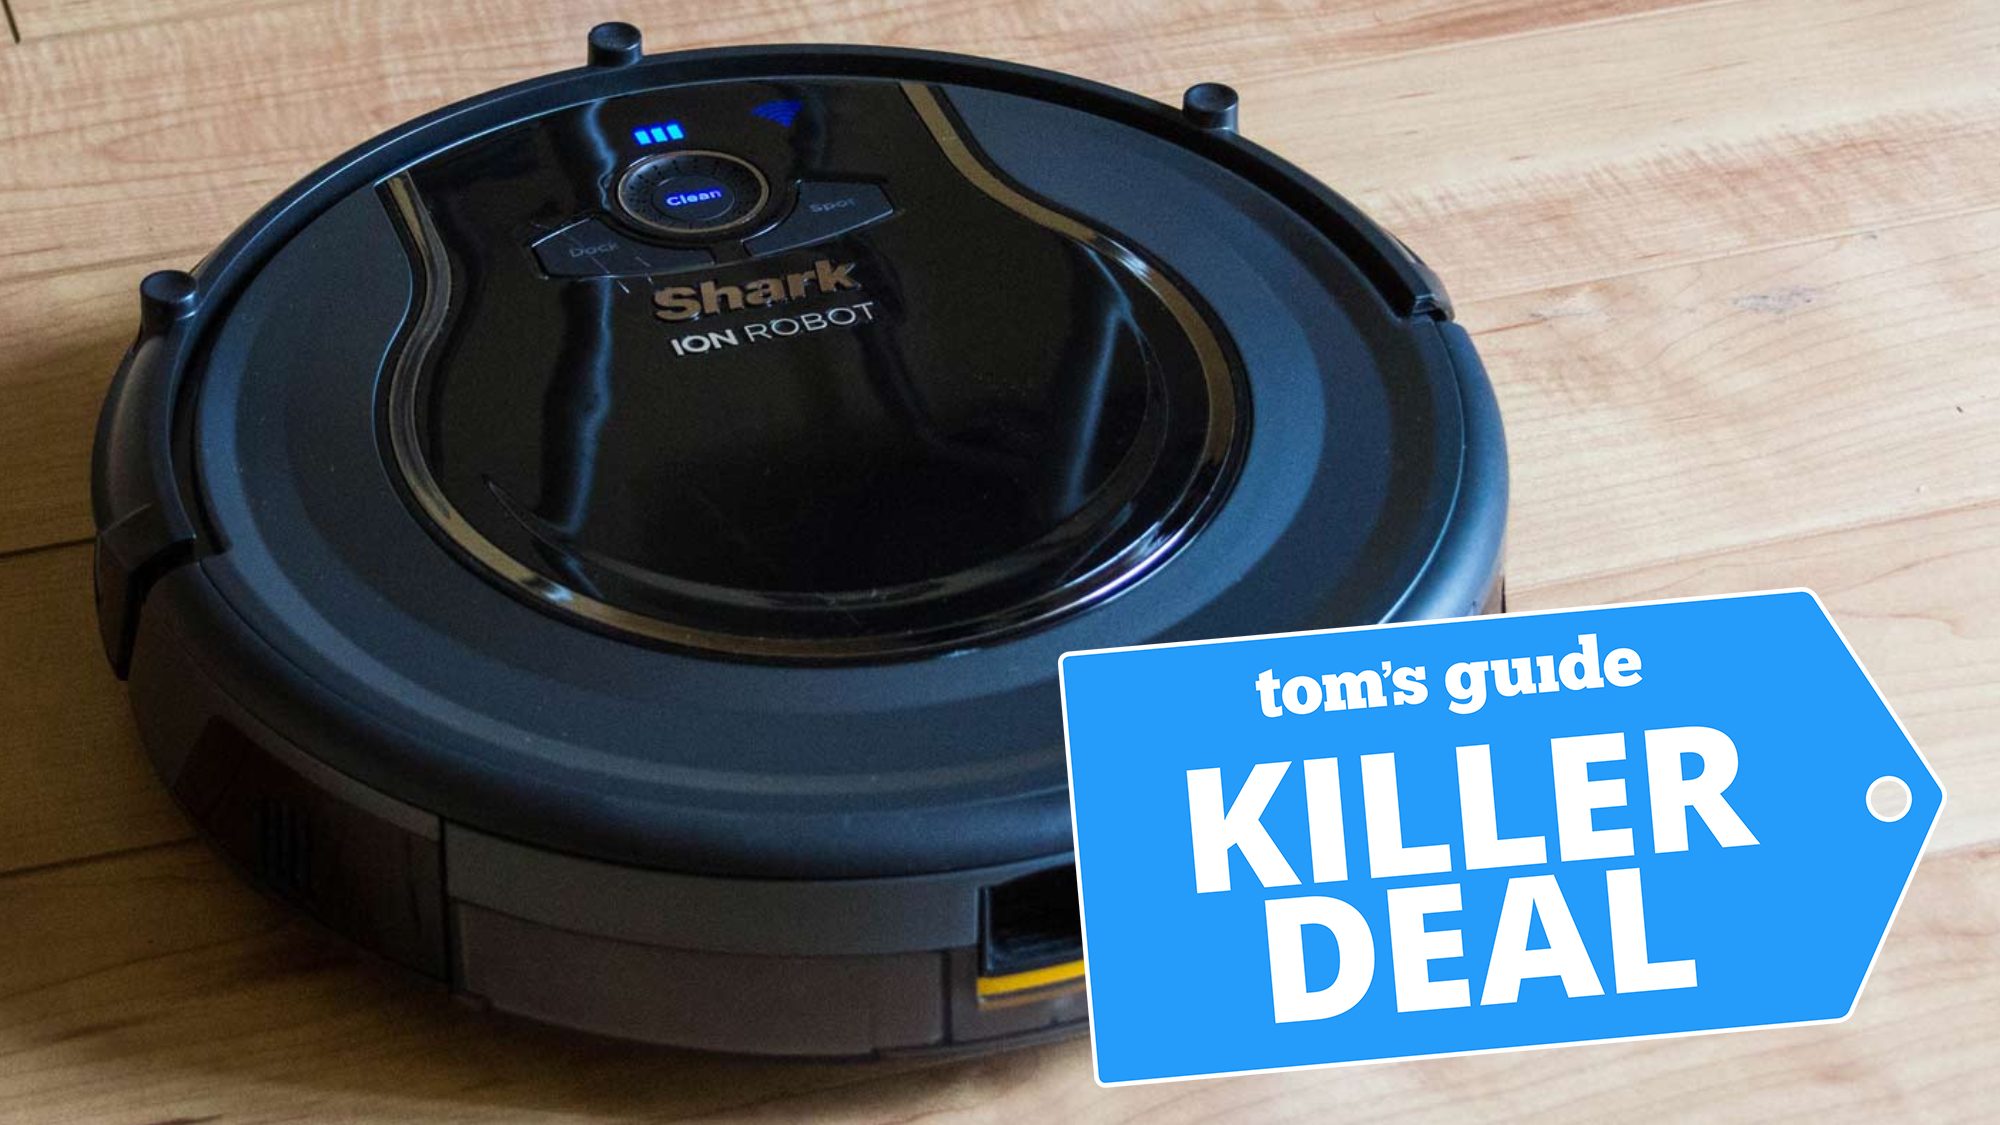 Shark's robot vacuum is Friday cheap today | Tom's Guide